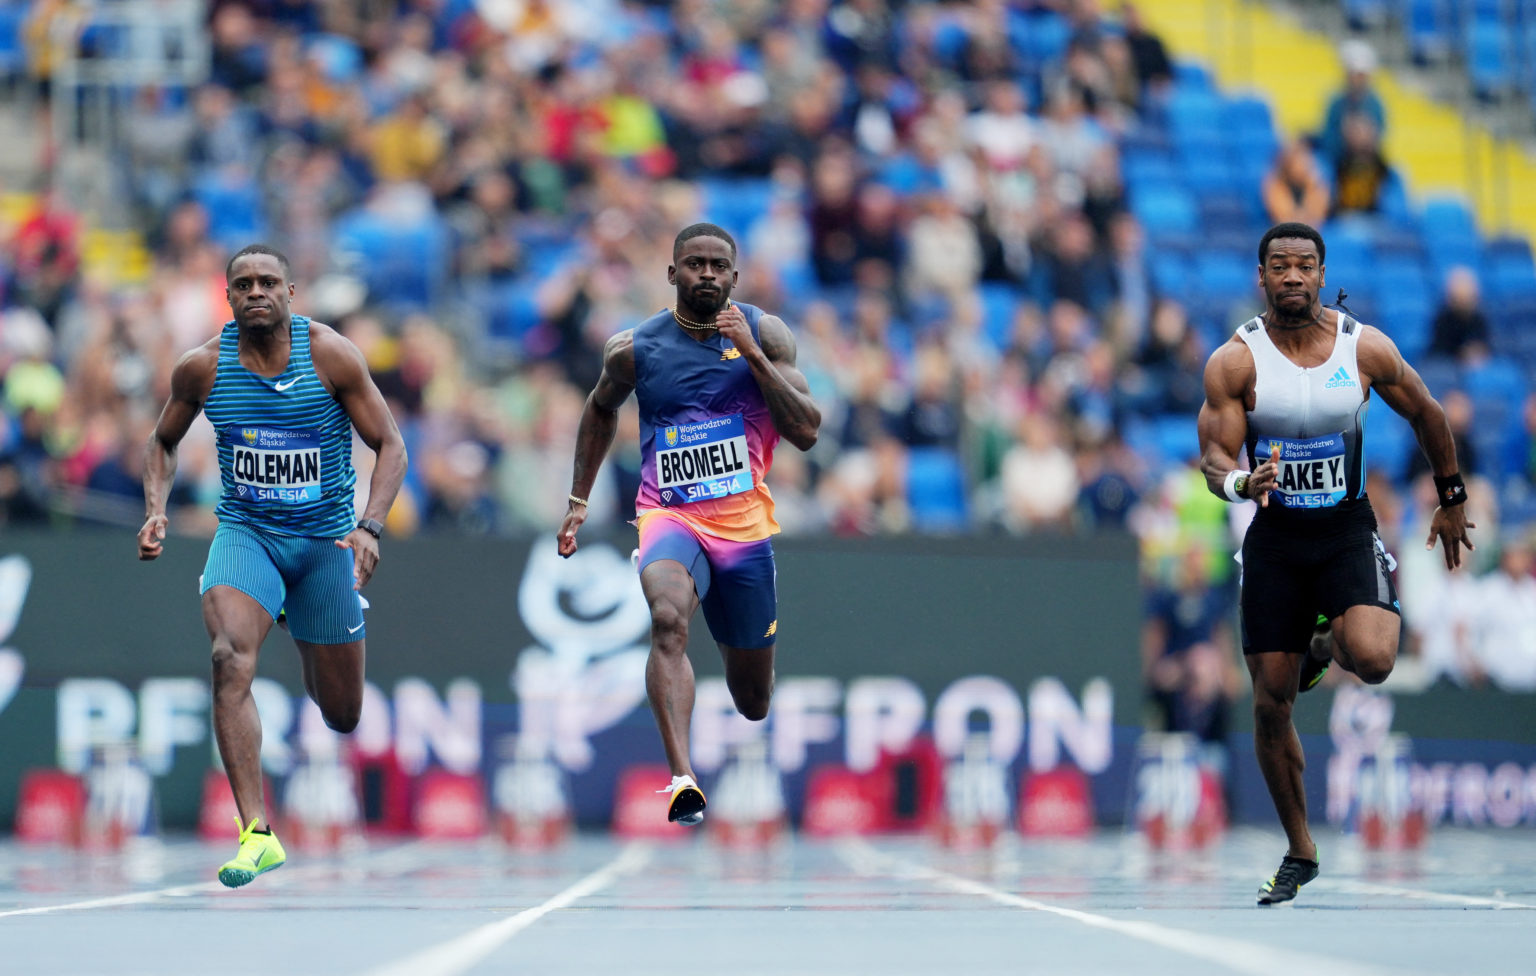 Jackson, Bromell claim victories in Silesia Diamond League Our Today